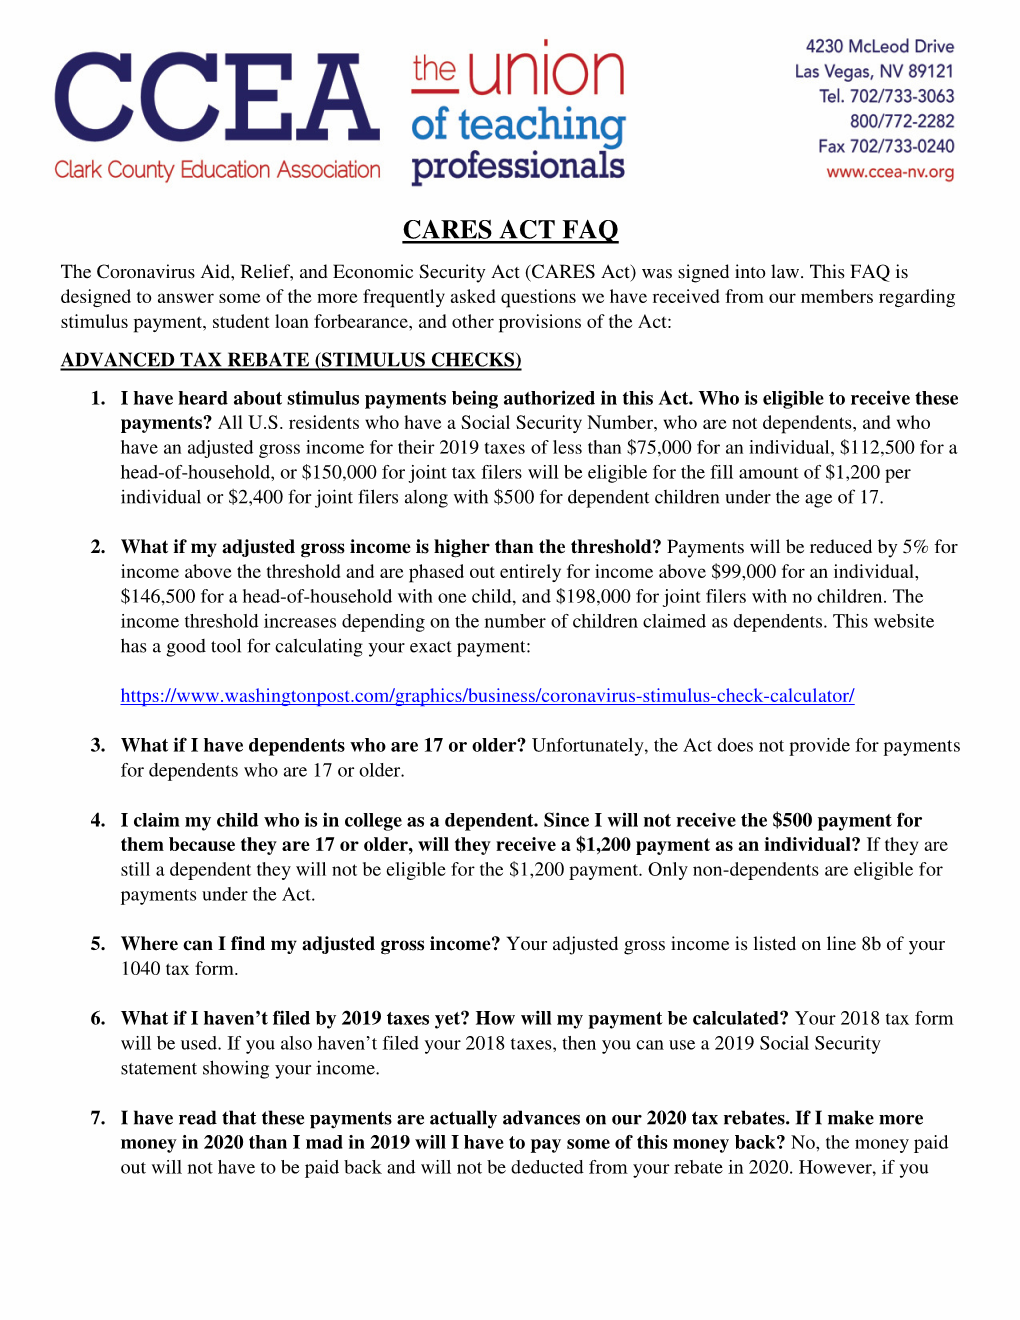 CARES ACT FAQ the Coronavirus Aid, Relief, and Economic Security Act (CARES Act) Was Signed Into Law